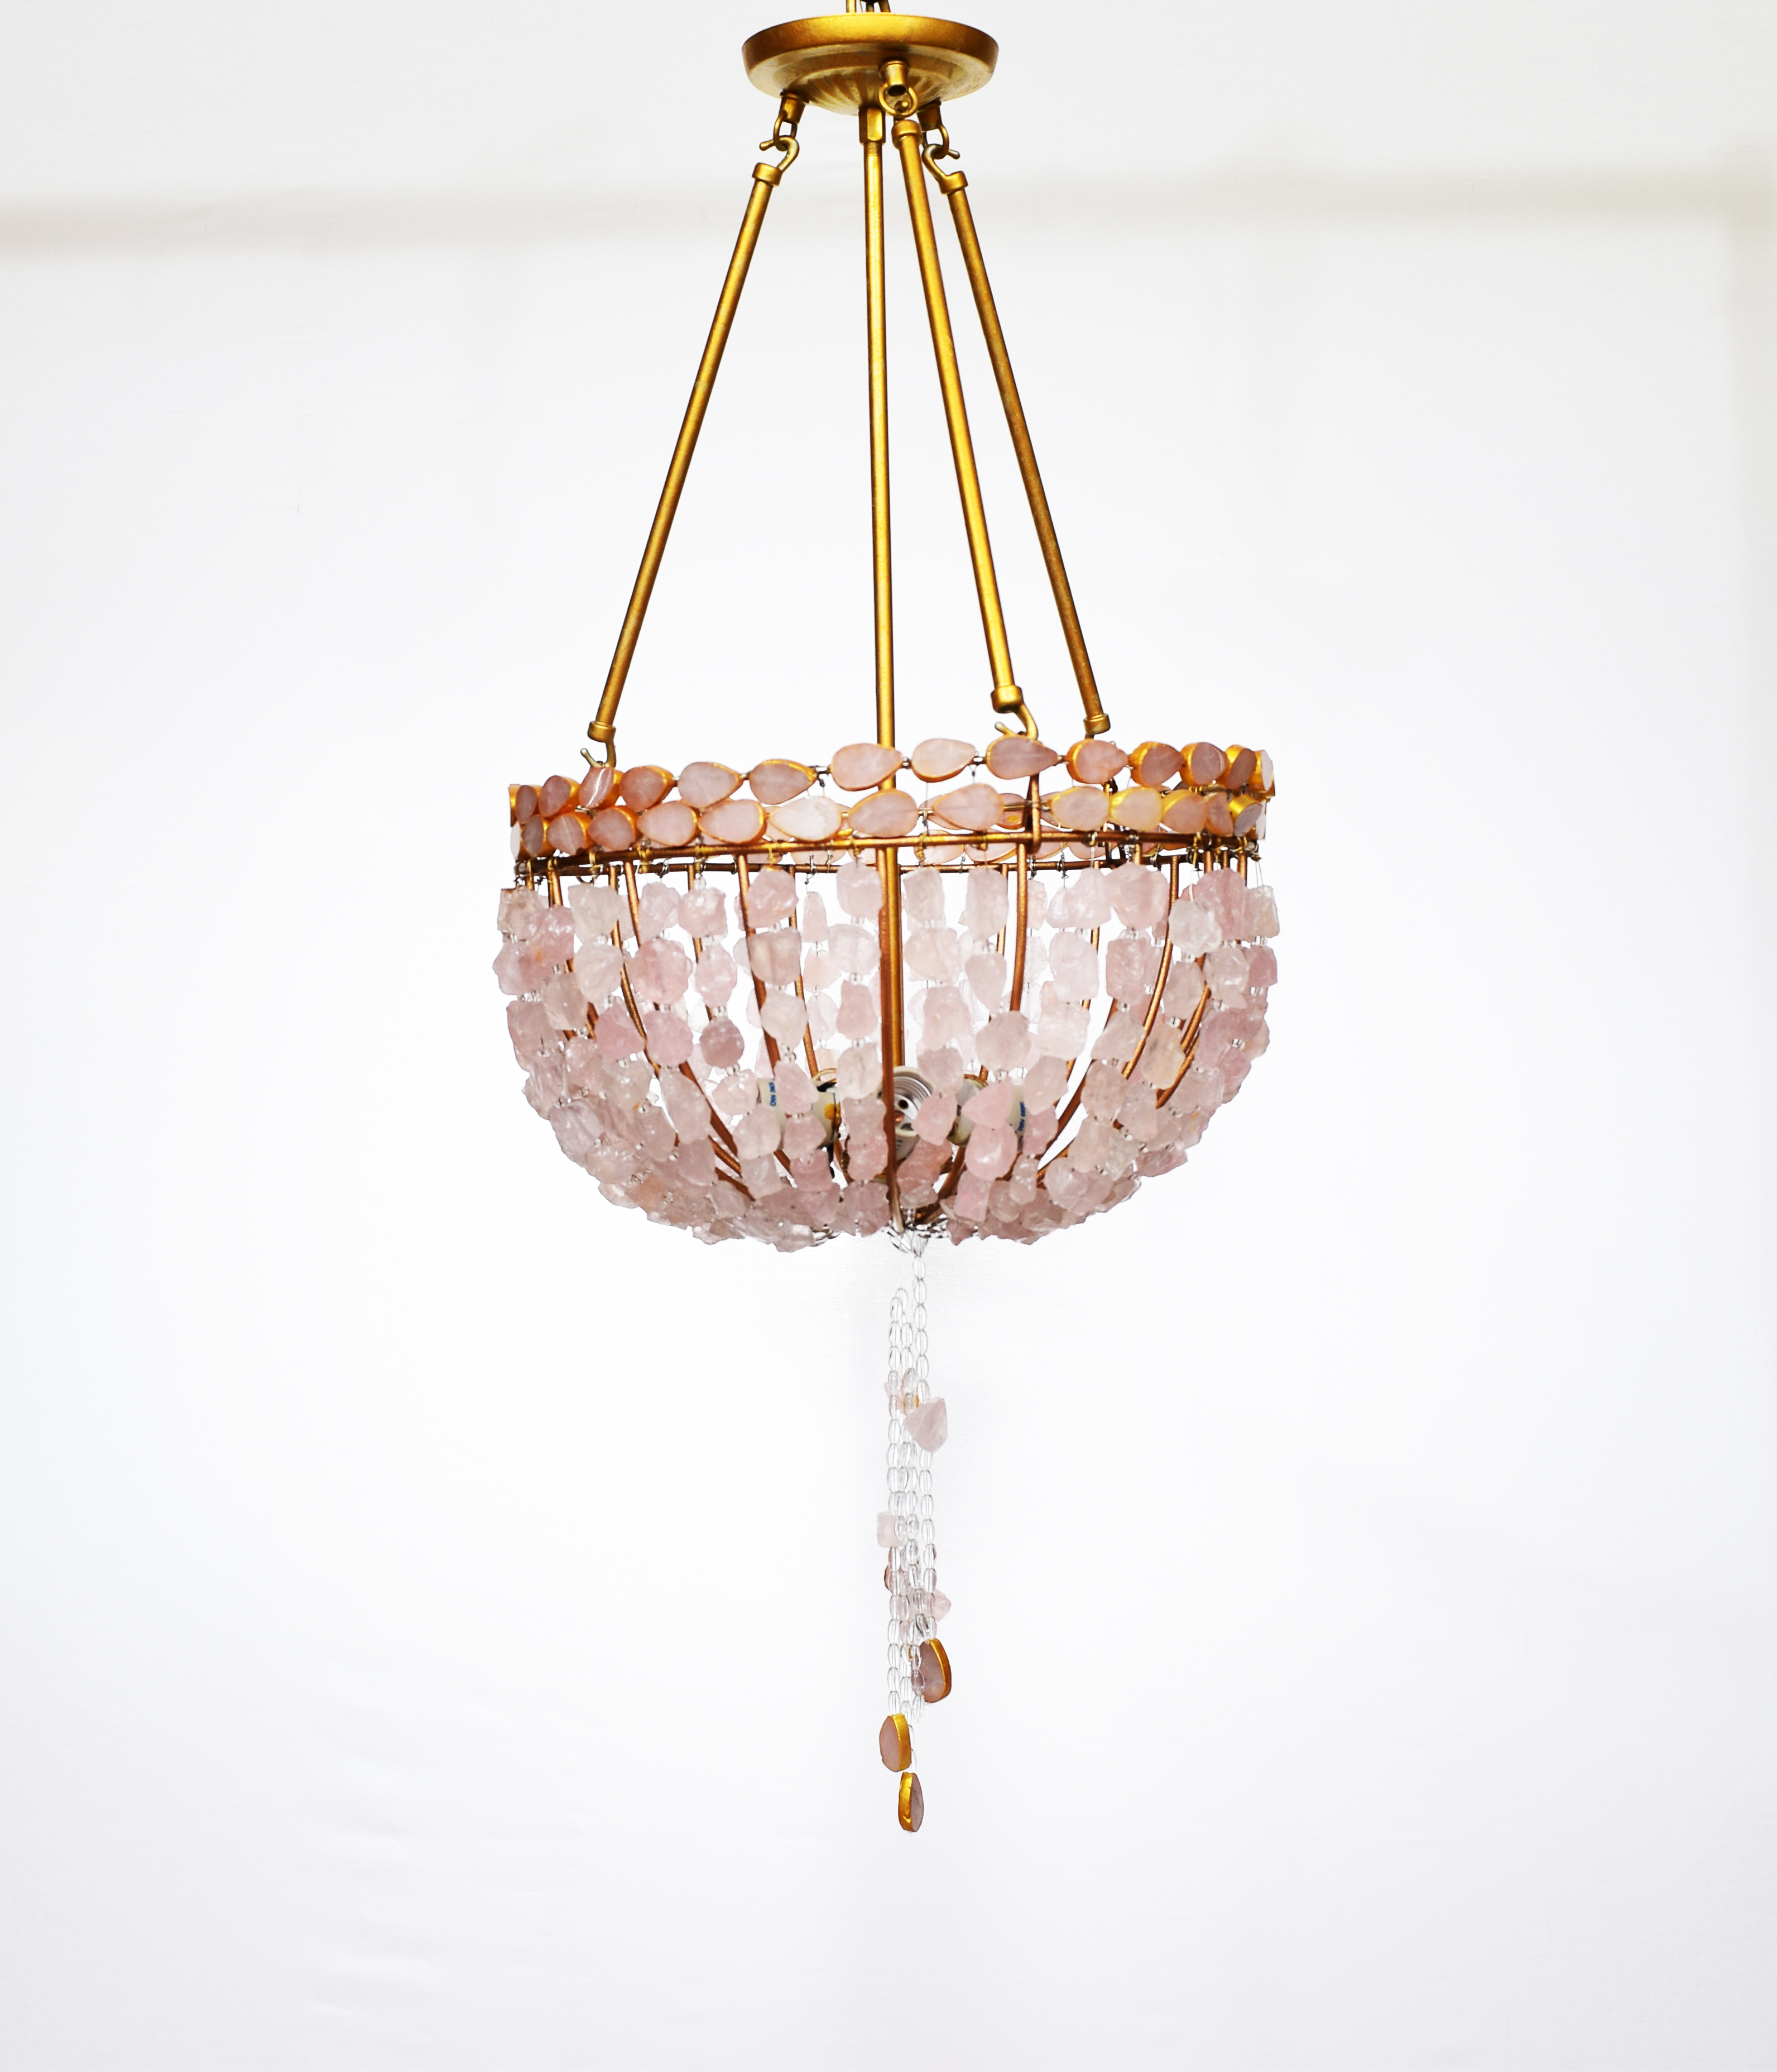 Jolie Chandelier from Au Courant'